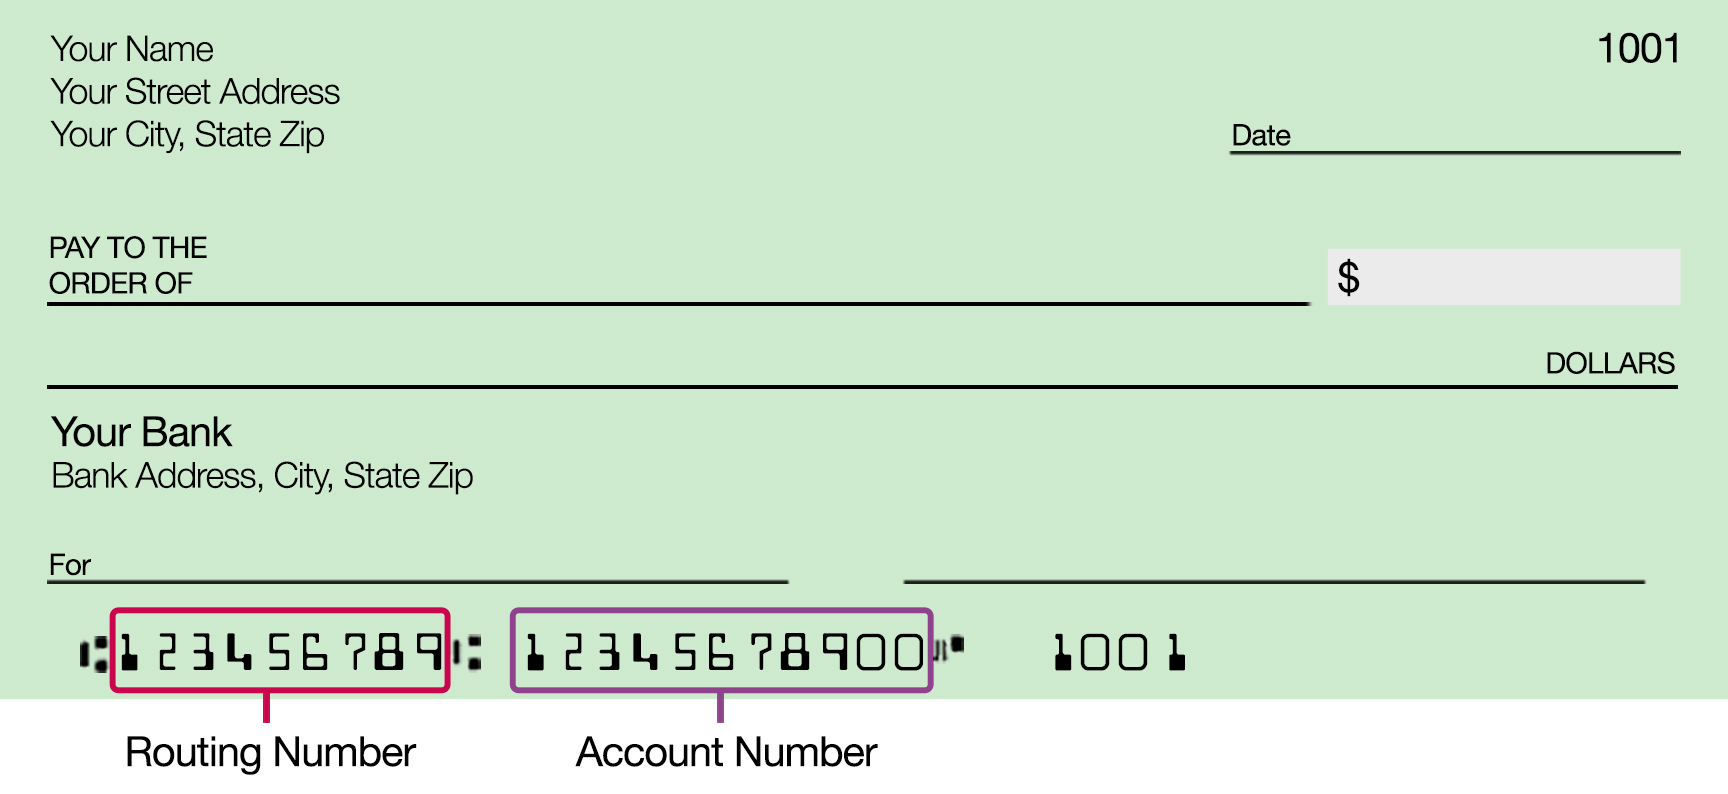 star financial bank routing number